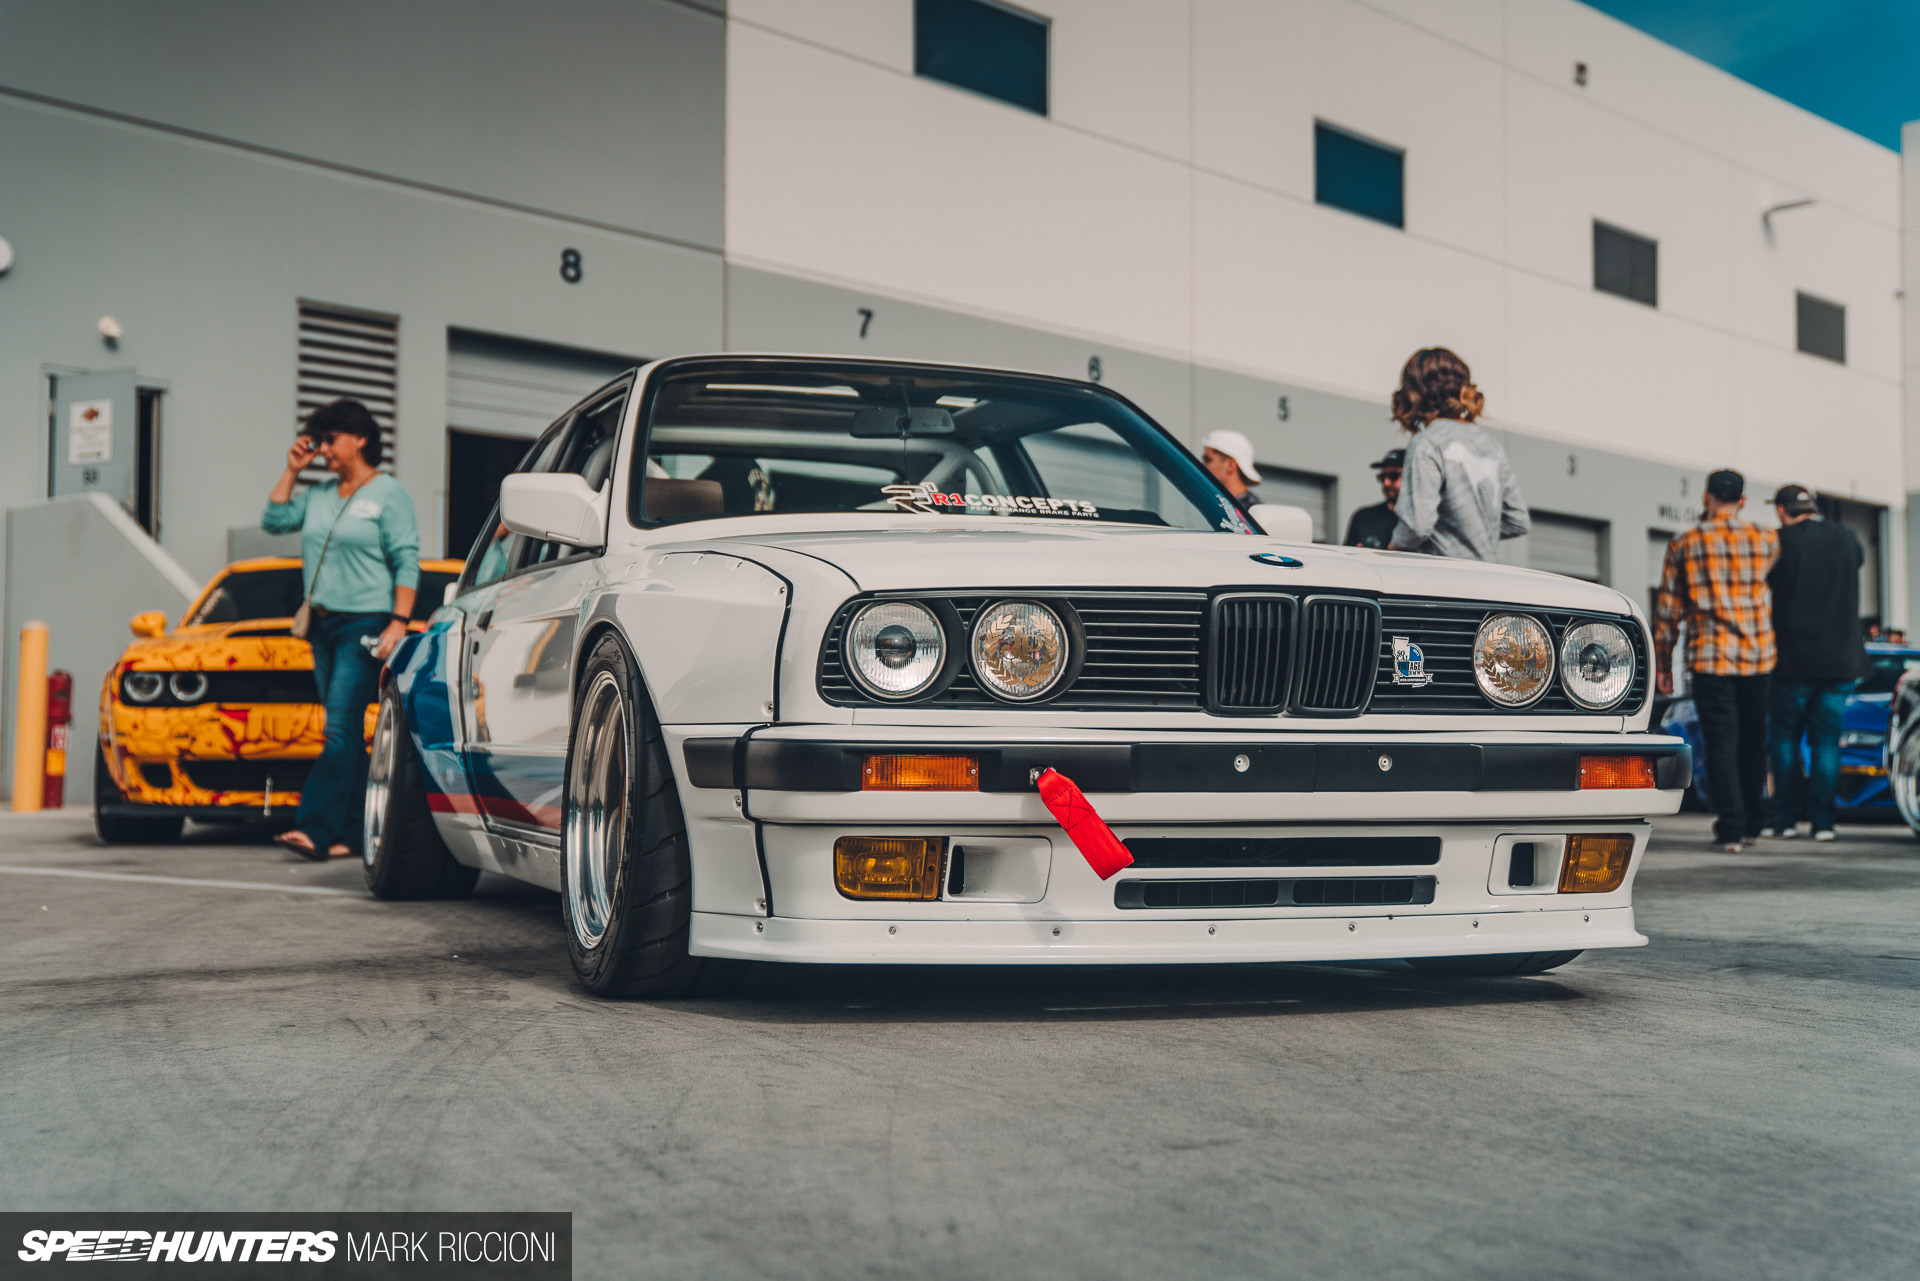 The Best Show I've Never Been To: Players Select - Speedhunters